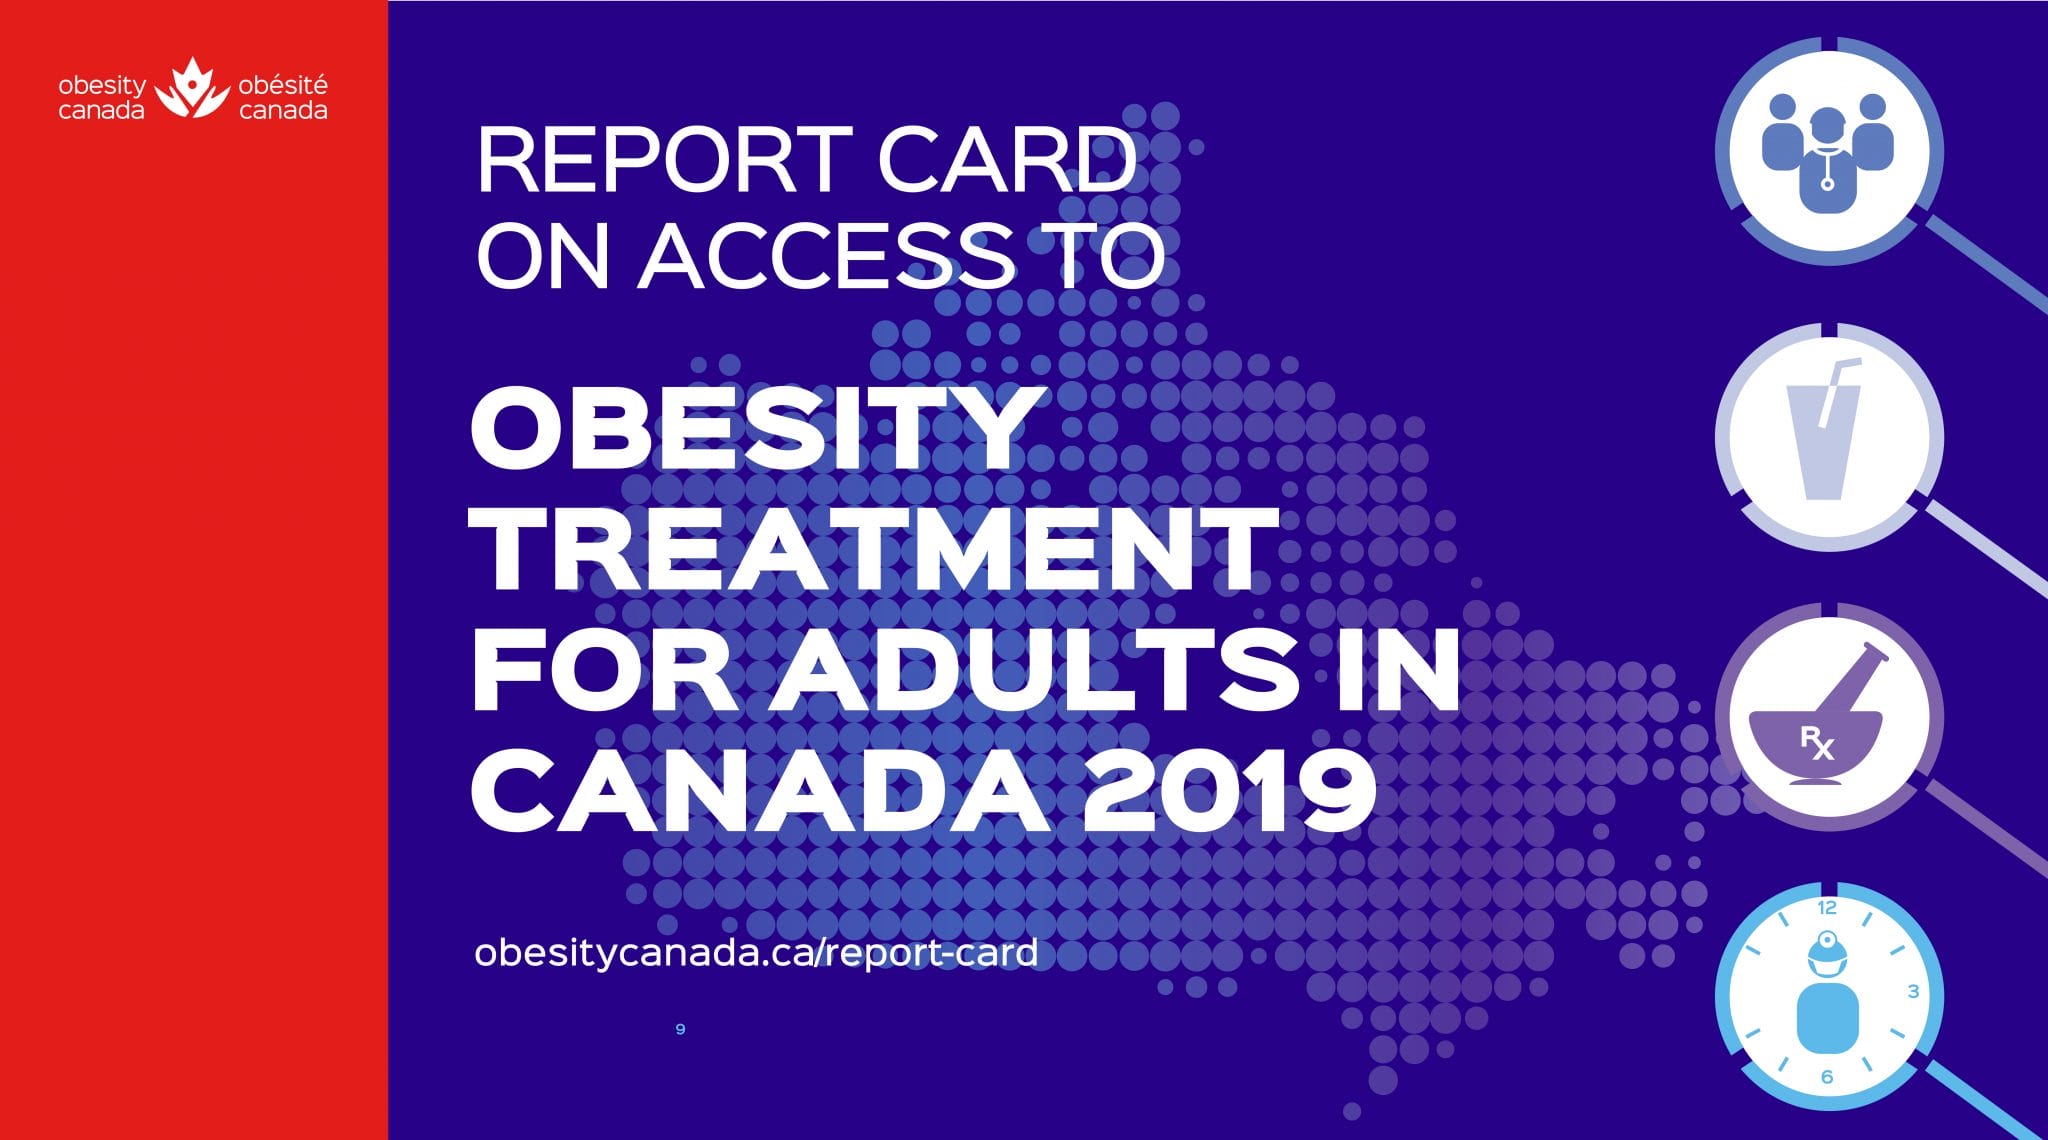 Graphic titled "report card on access to obesity treatment for adults in canada 2019" with symbols of healthcare and a website link.